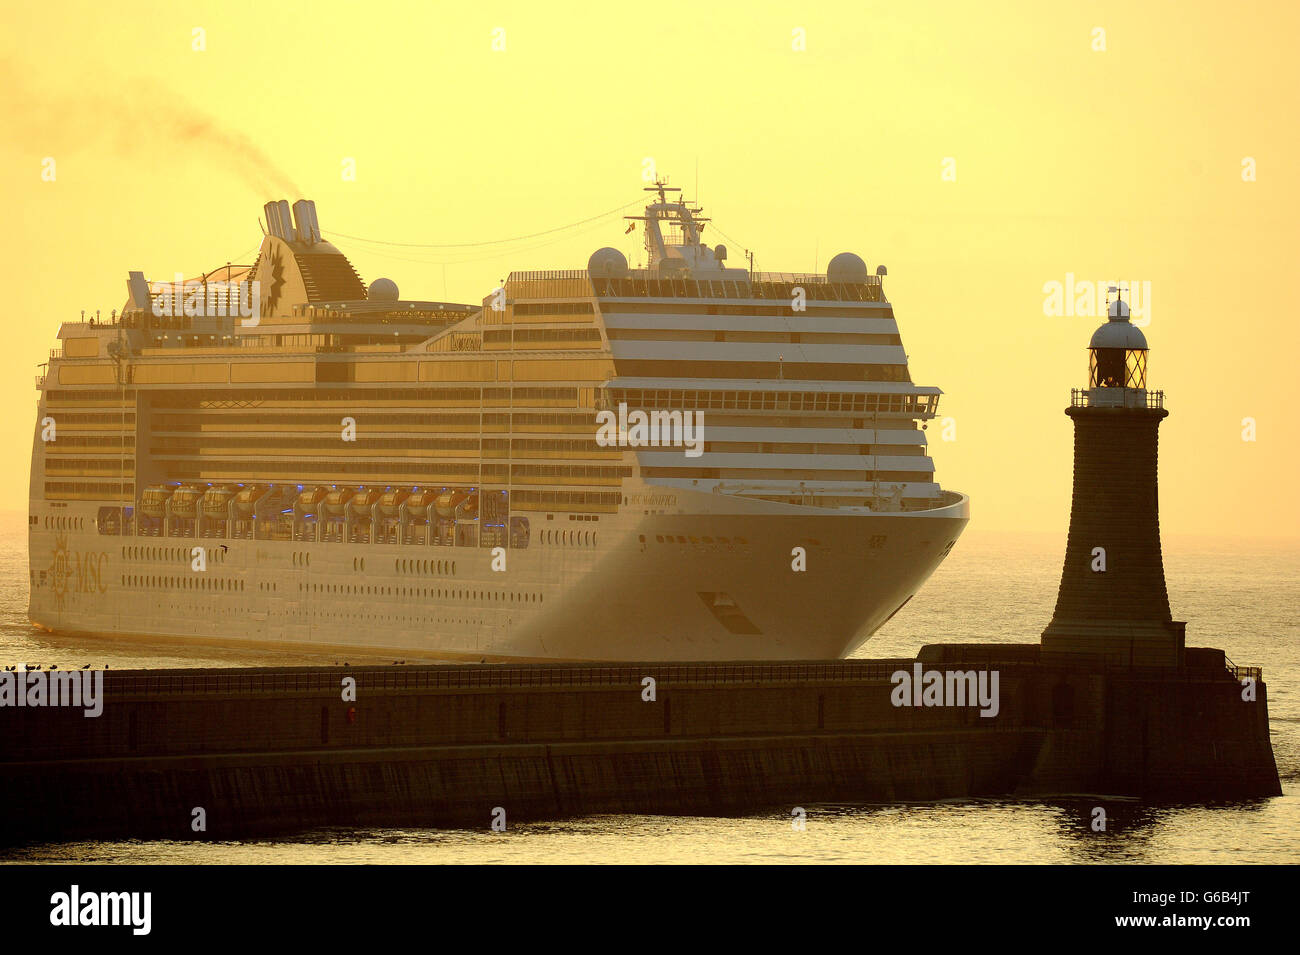 The MSC Magnifica cruise ship enters the mouth of River Tyne at sunrise. Stock Photo